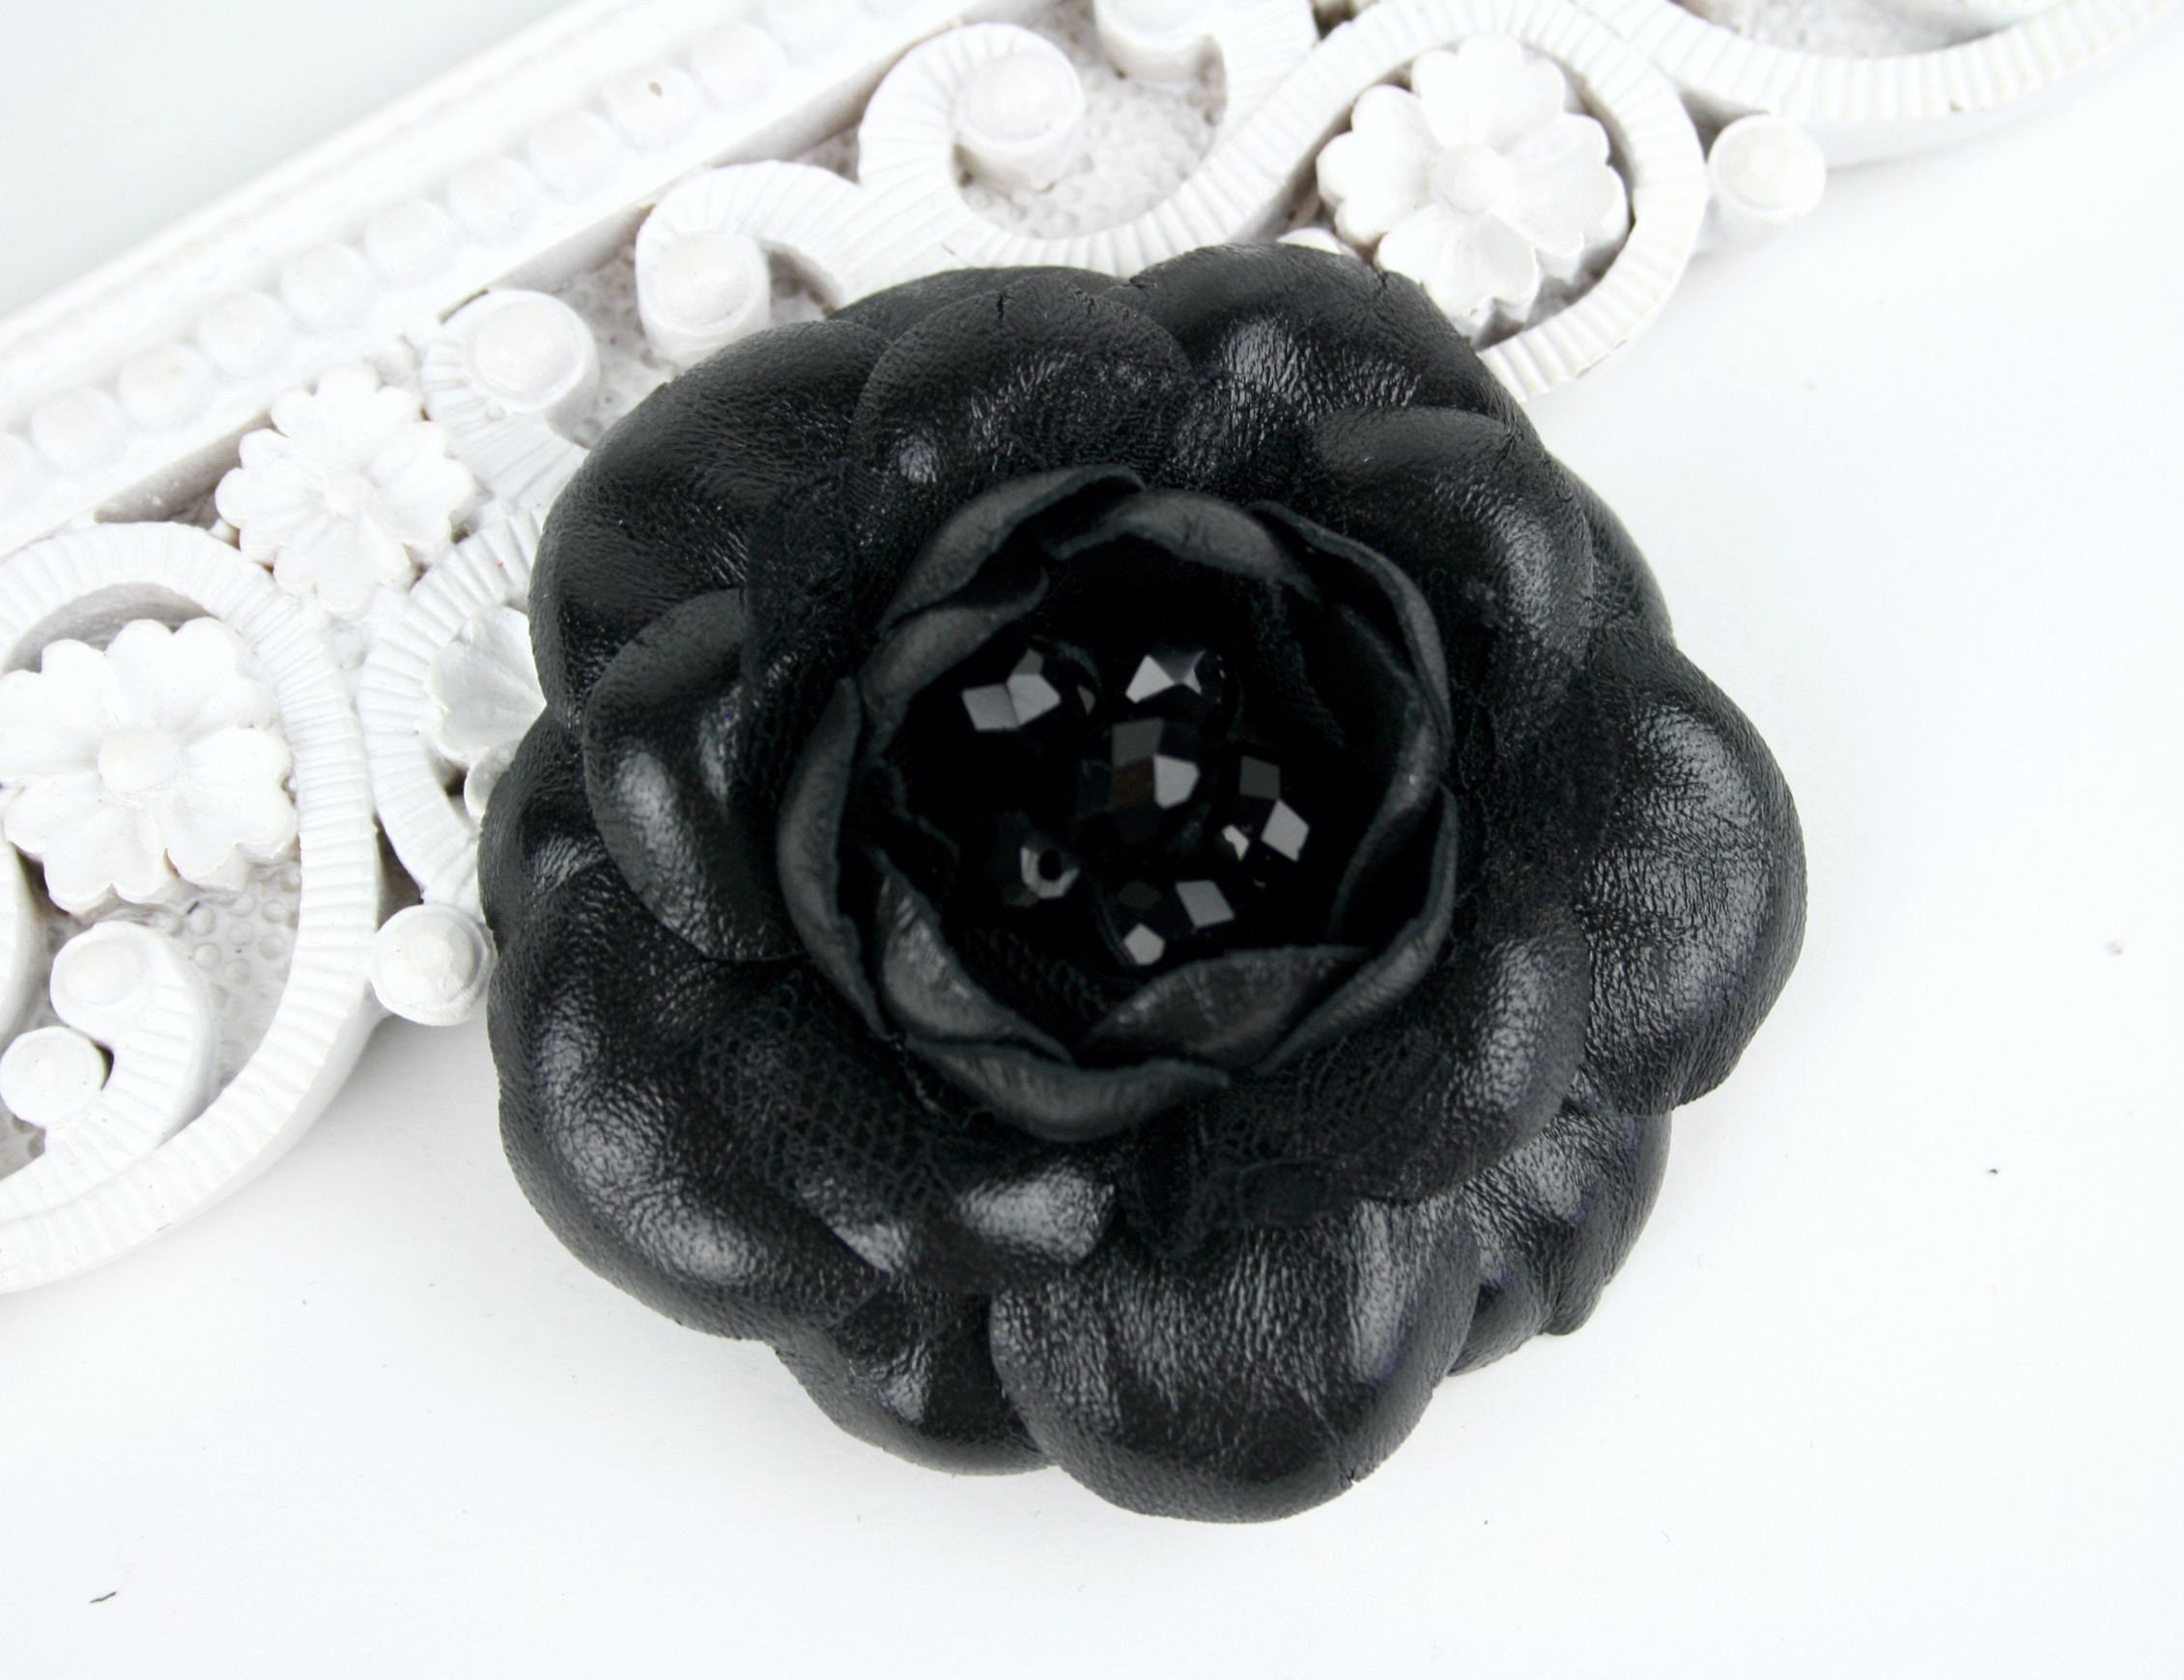 Authentic New Chanel Black/White Camelia Flower Satin Bow Barrette Hair  Clip Hair Accessory